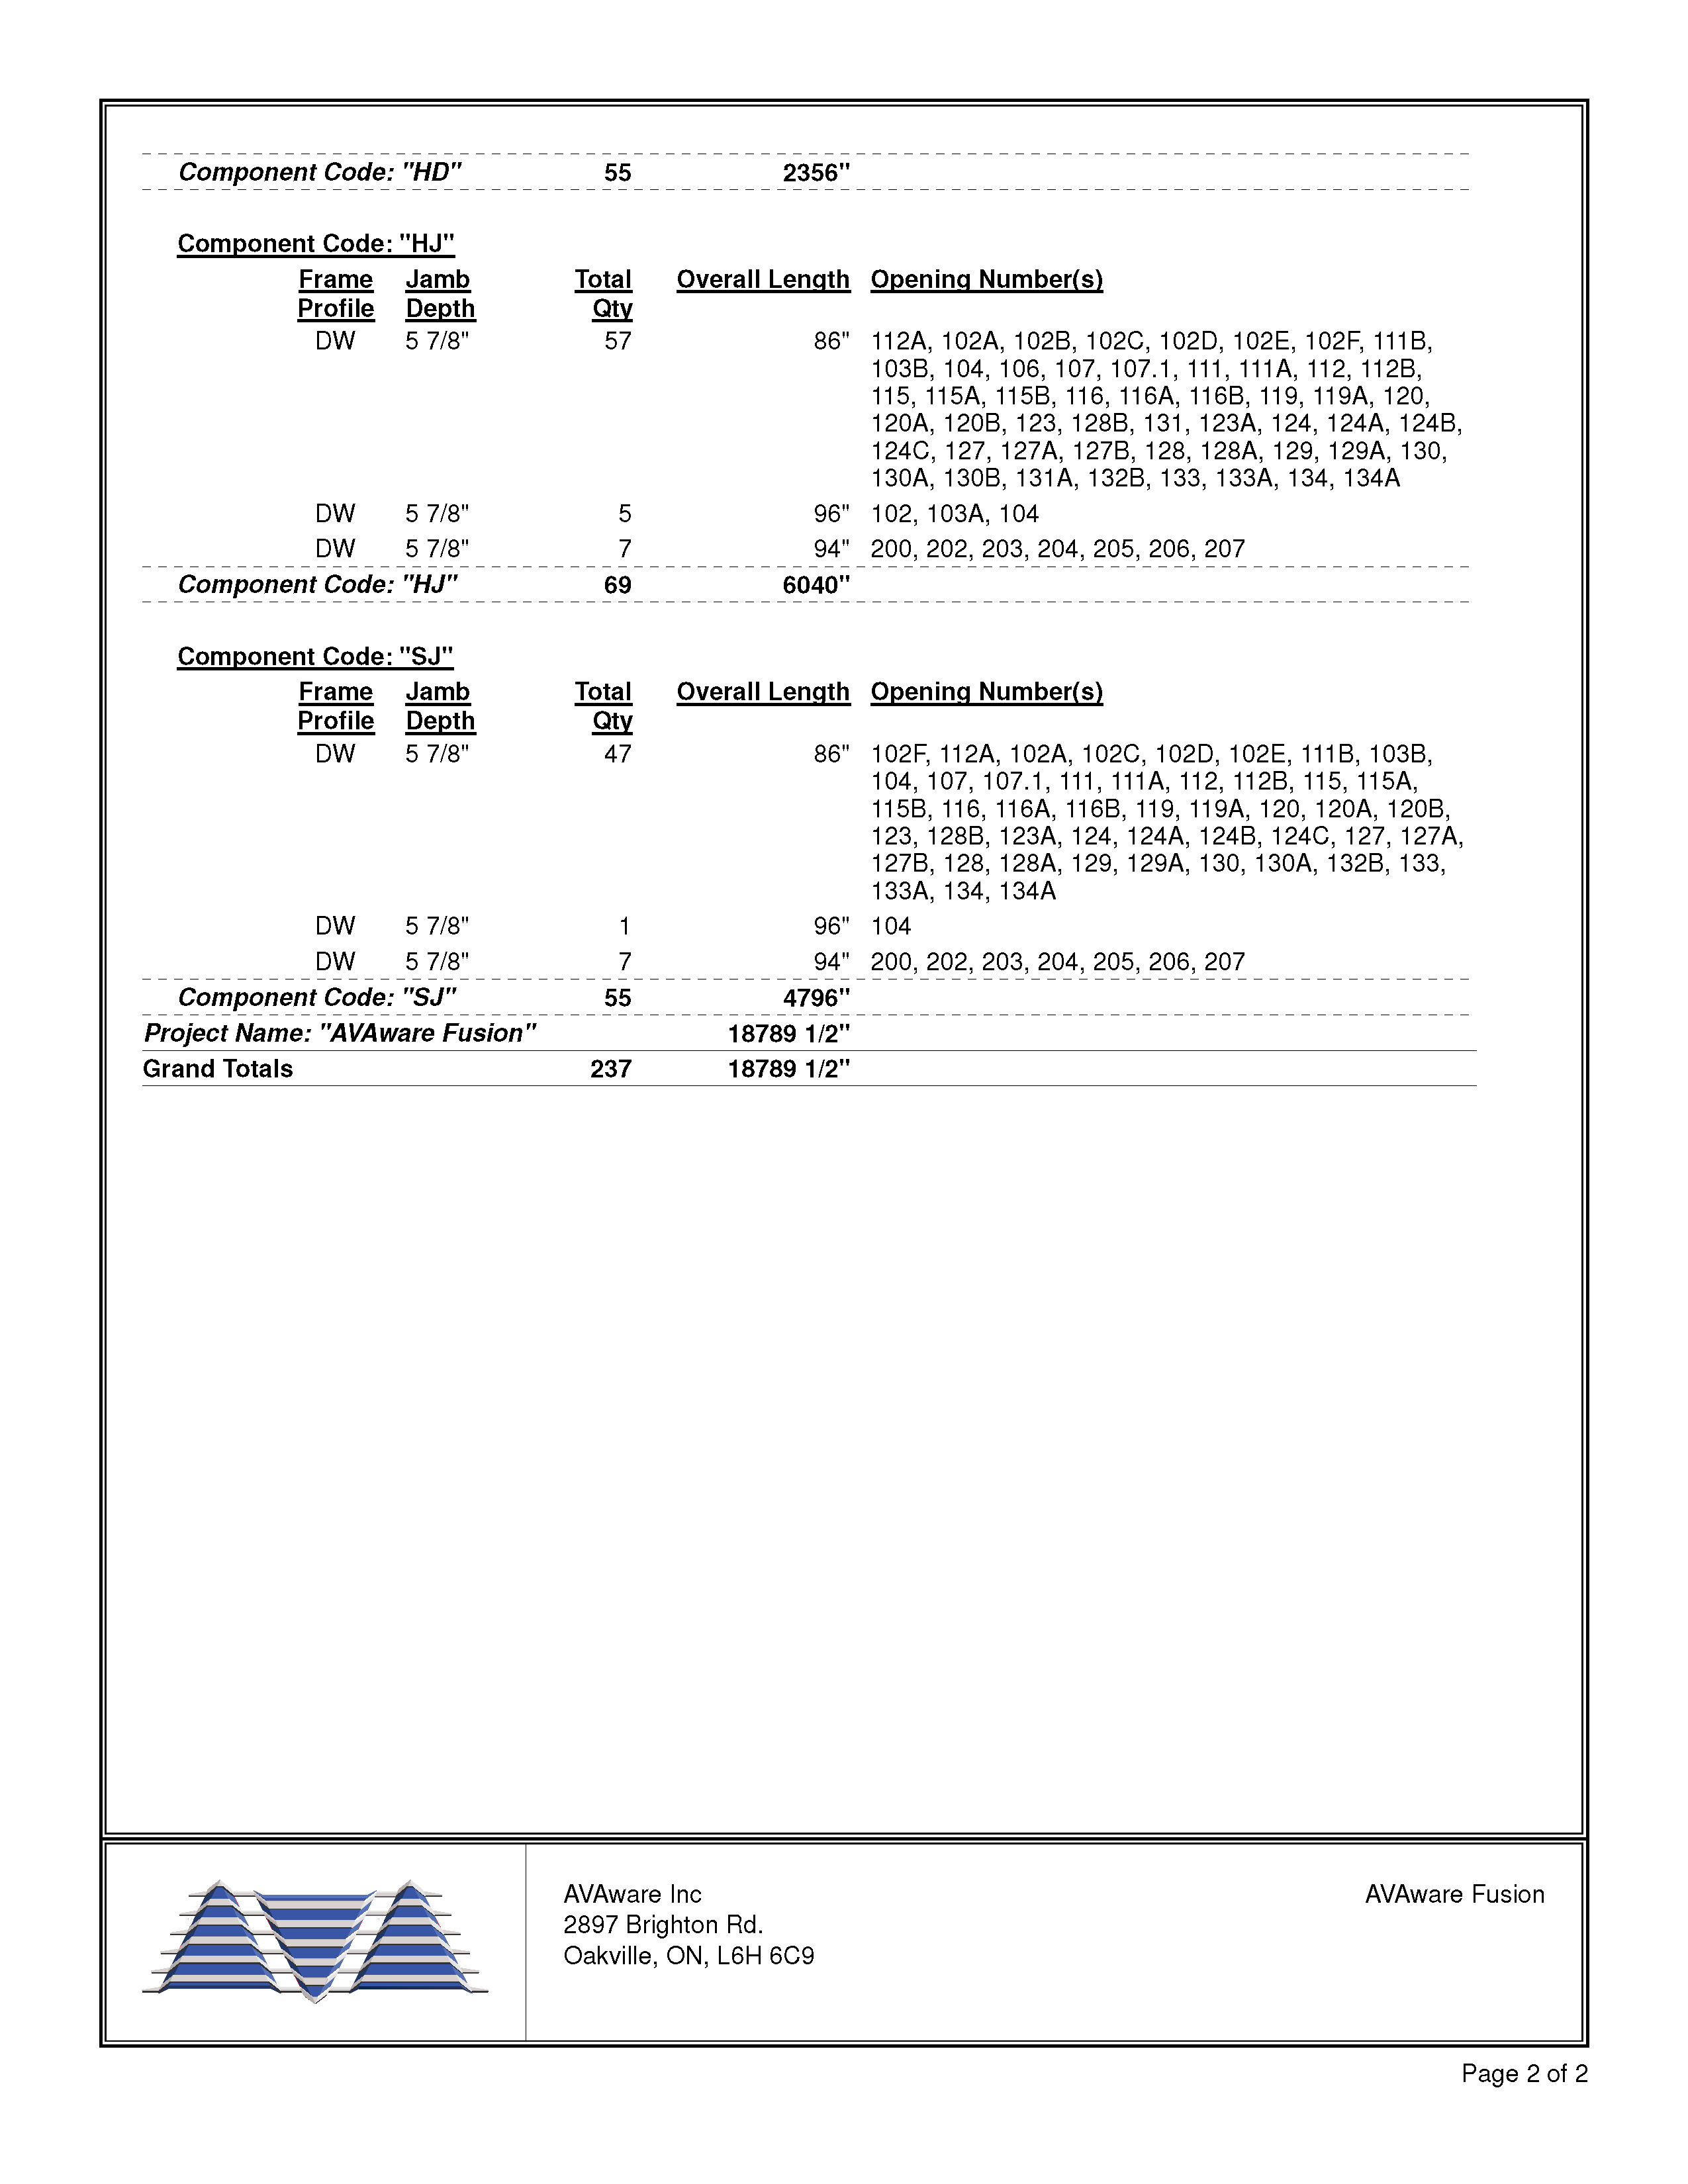 Frame Component Summary Page 2